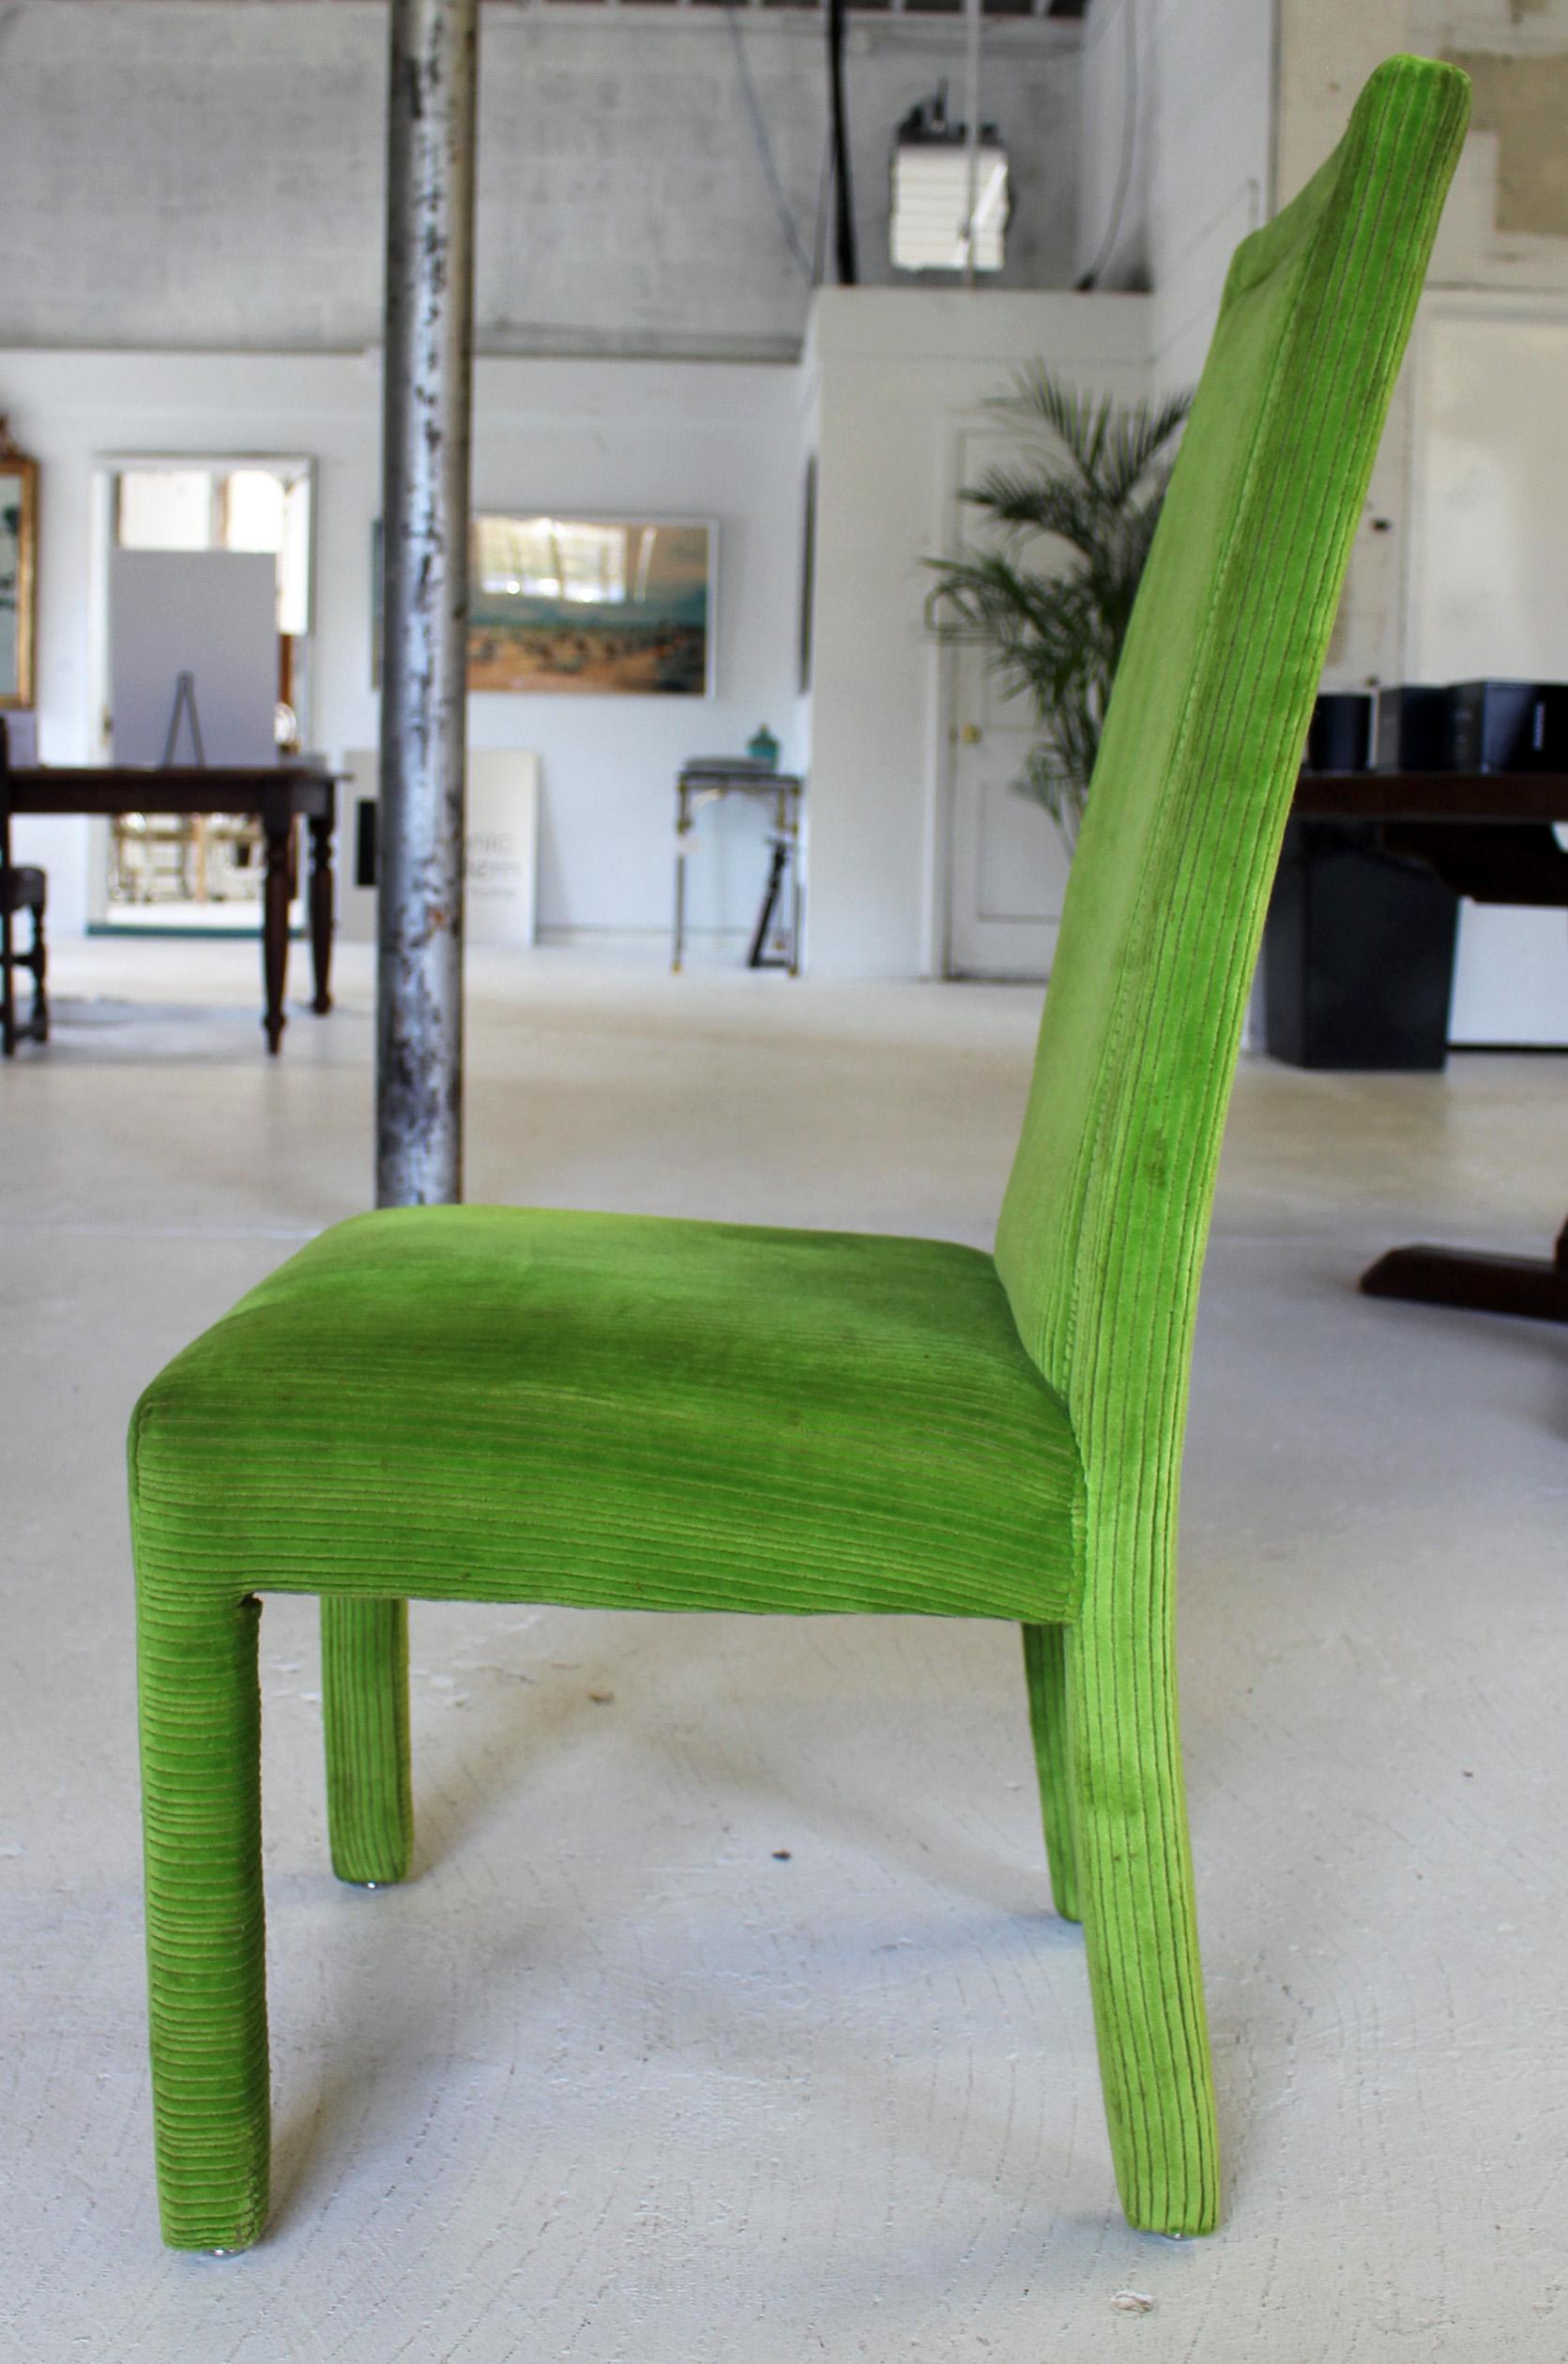 Set of 8 Dining Chairs in Vintage Classic Green Color In Good Condition For Sale In Bridport, CT